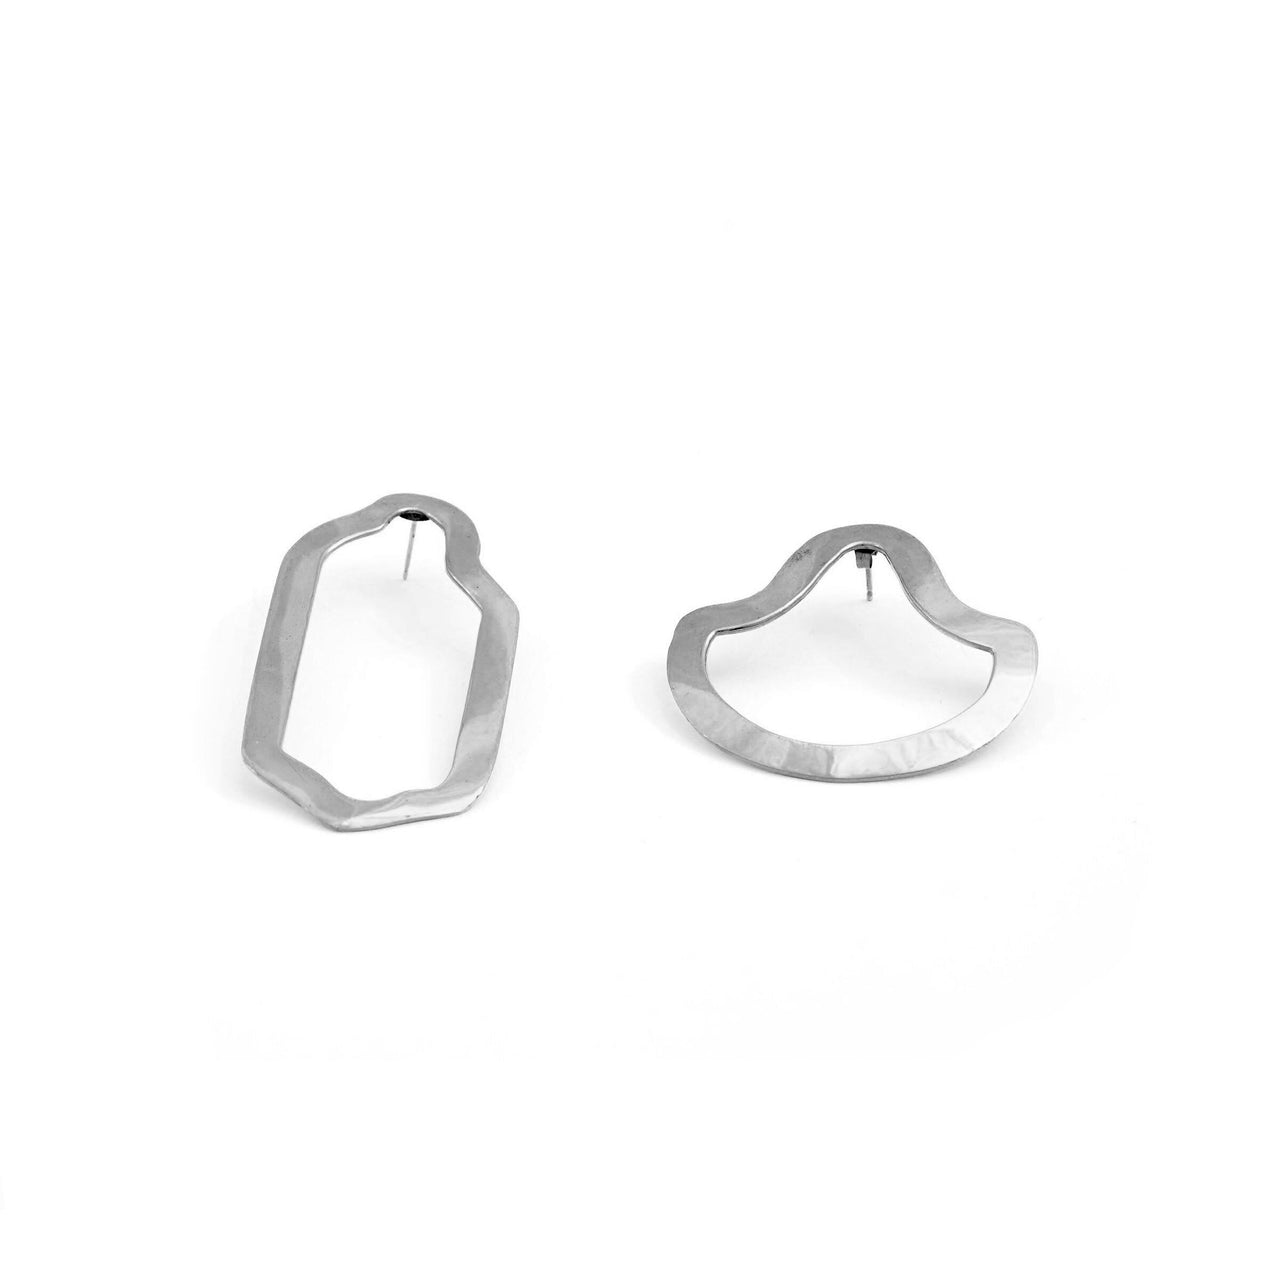 Negative Space Puzzle Earrings - Sterling